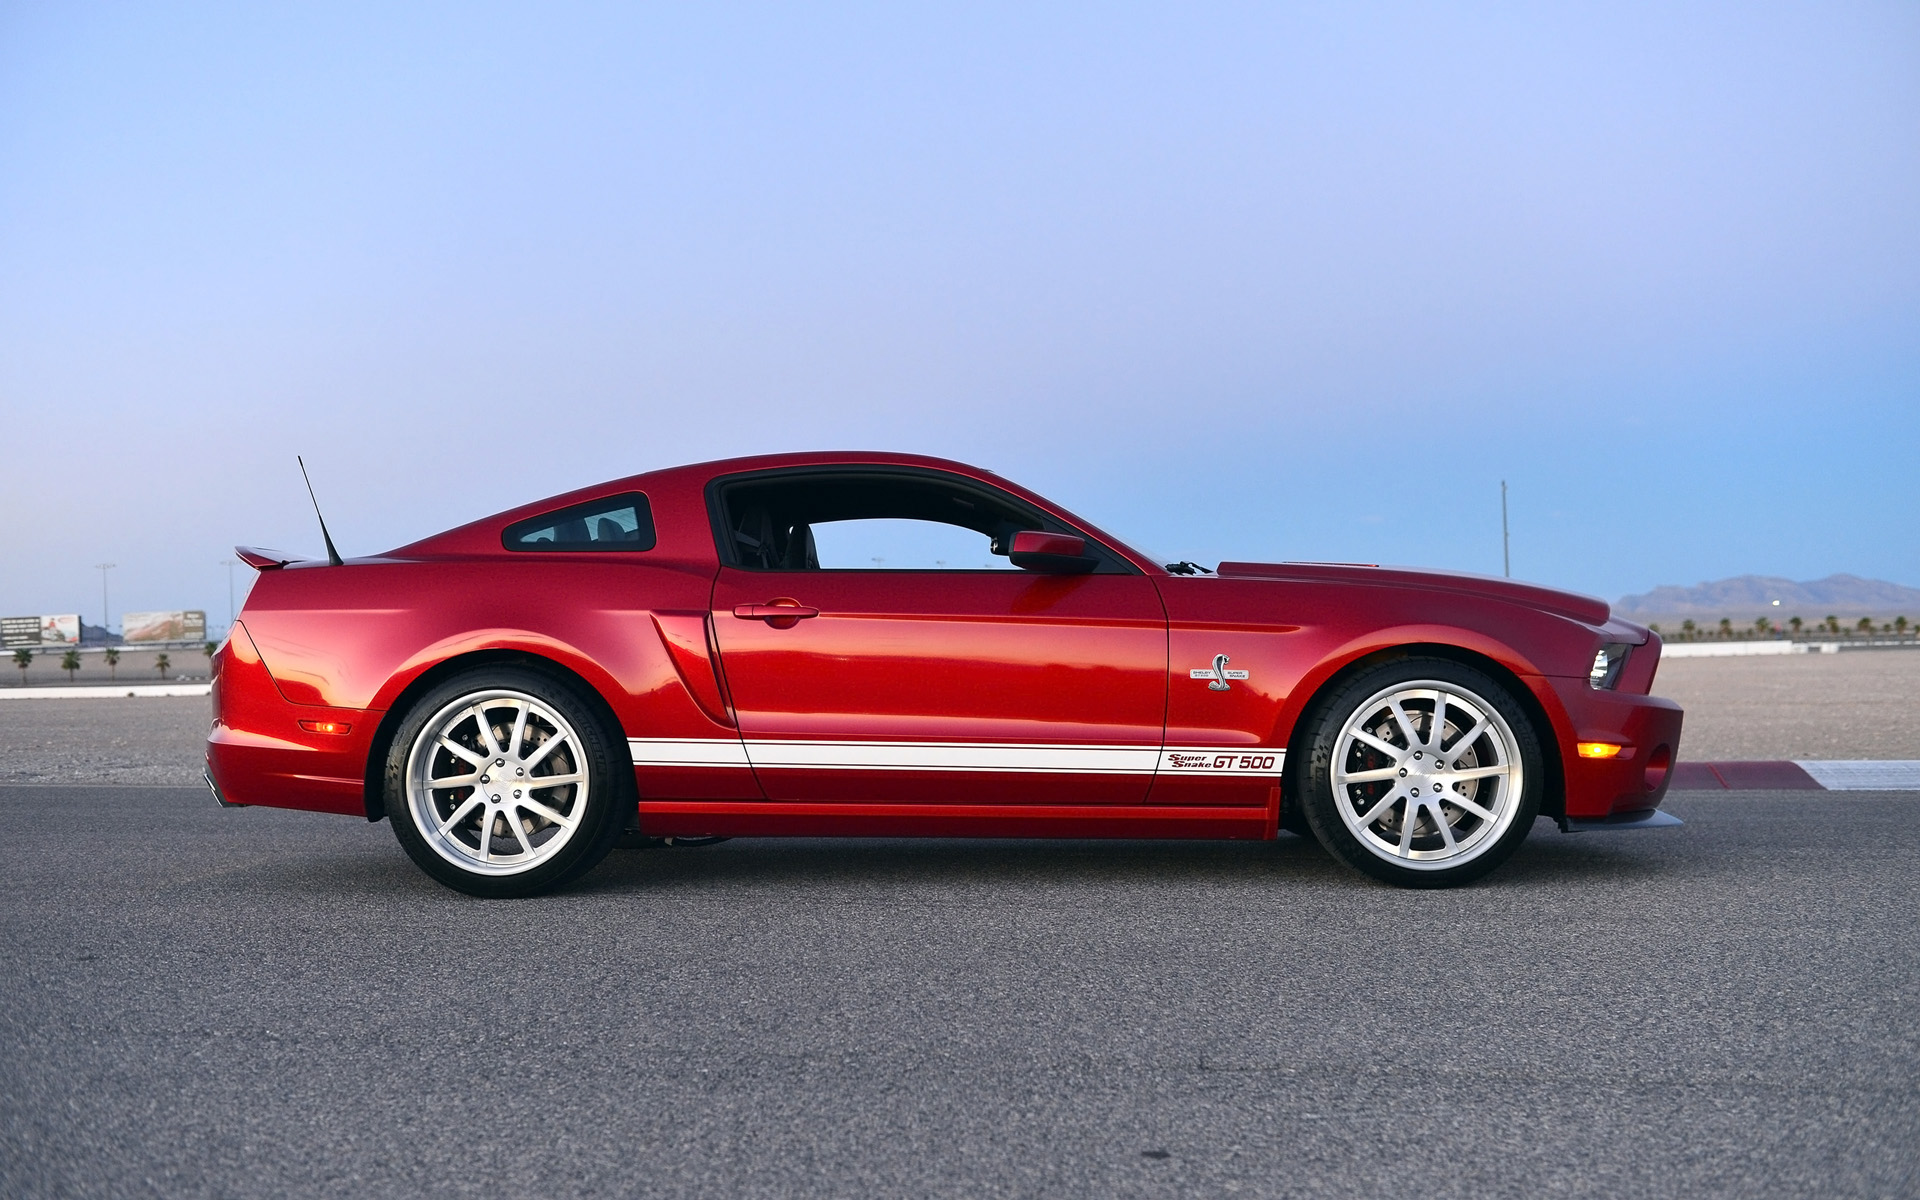 Ford Mustang Shelby Gt500 Super Snake Wallpaper Engine